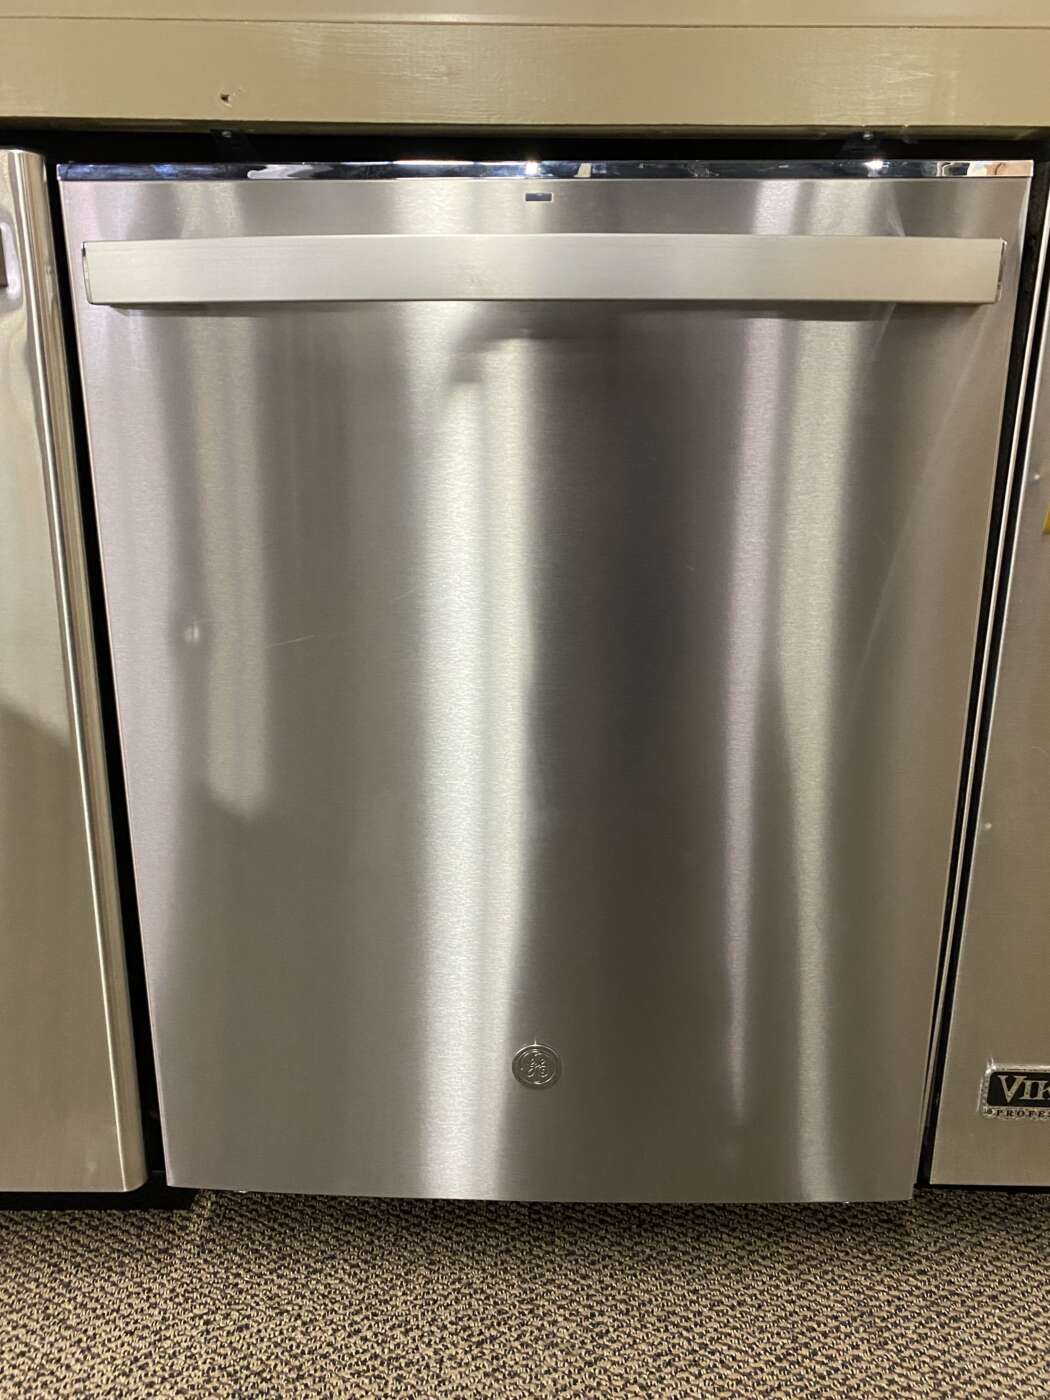 Reconditioned GE Dishwasher